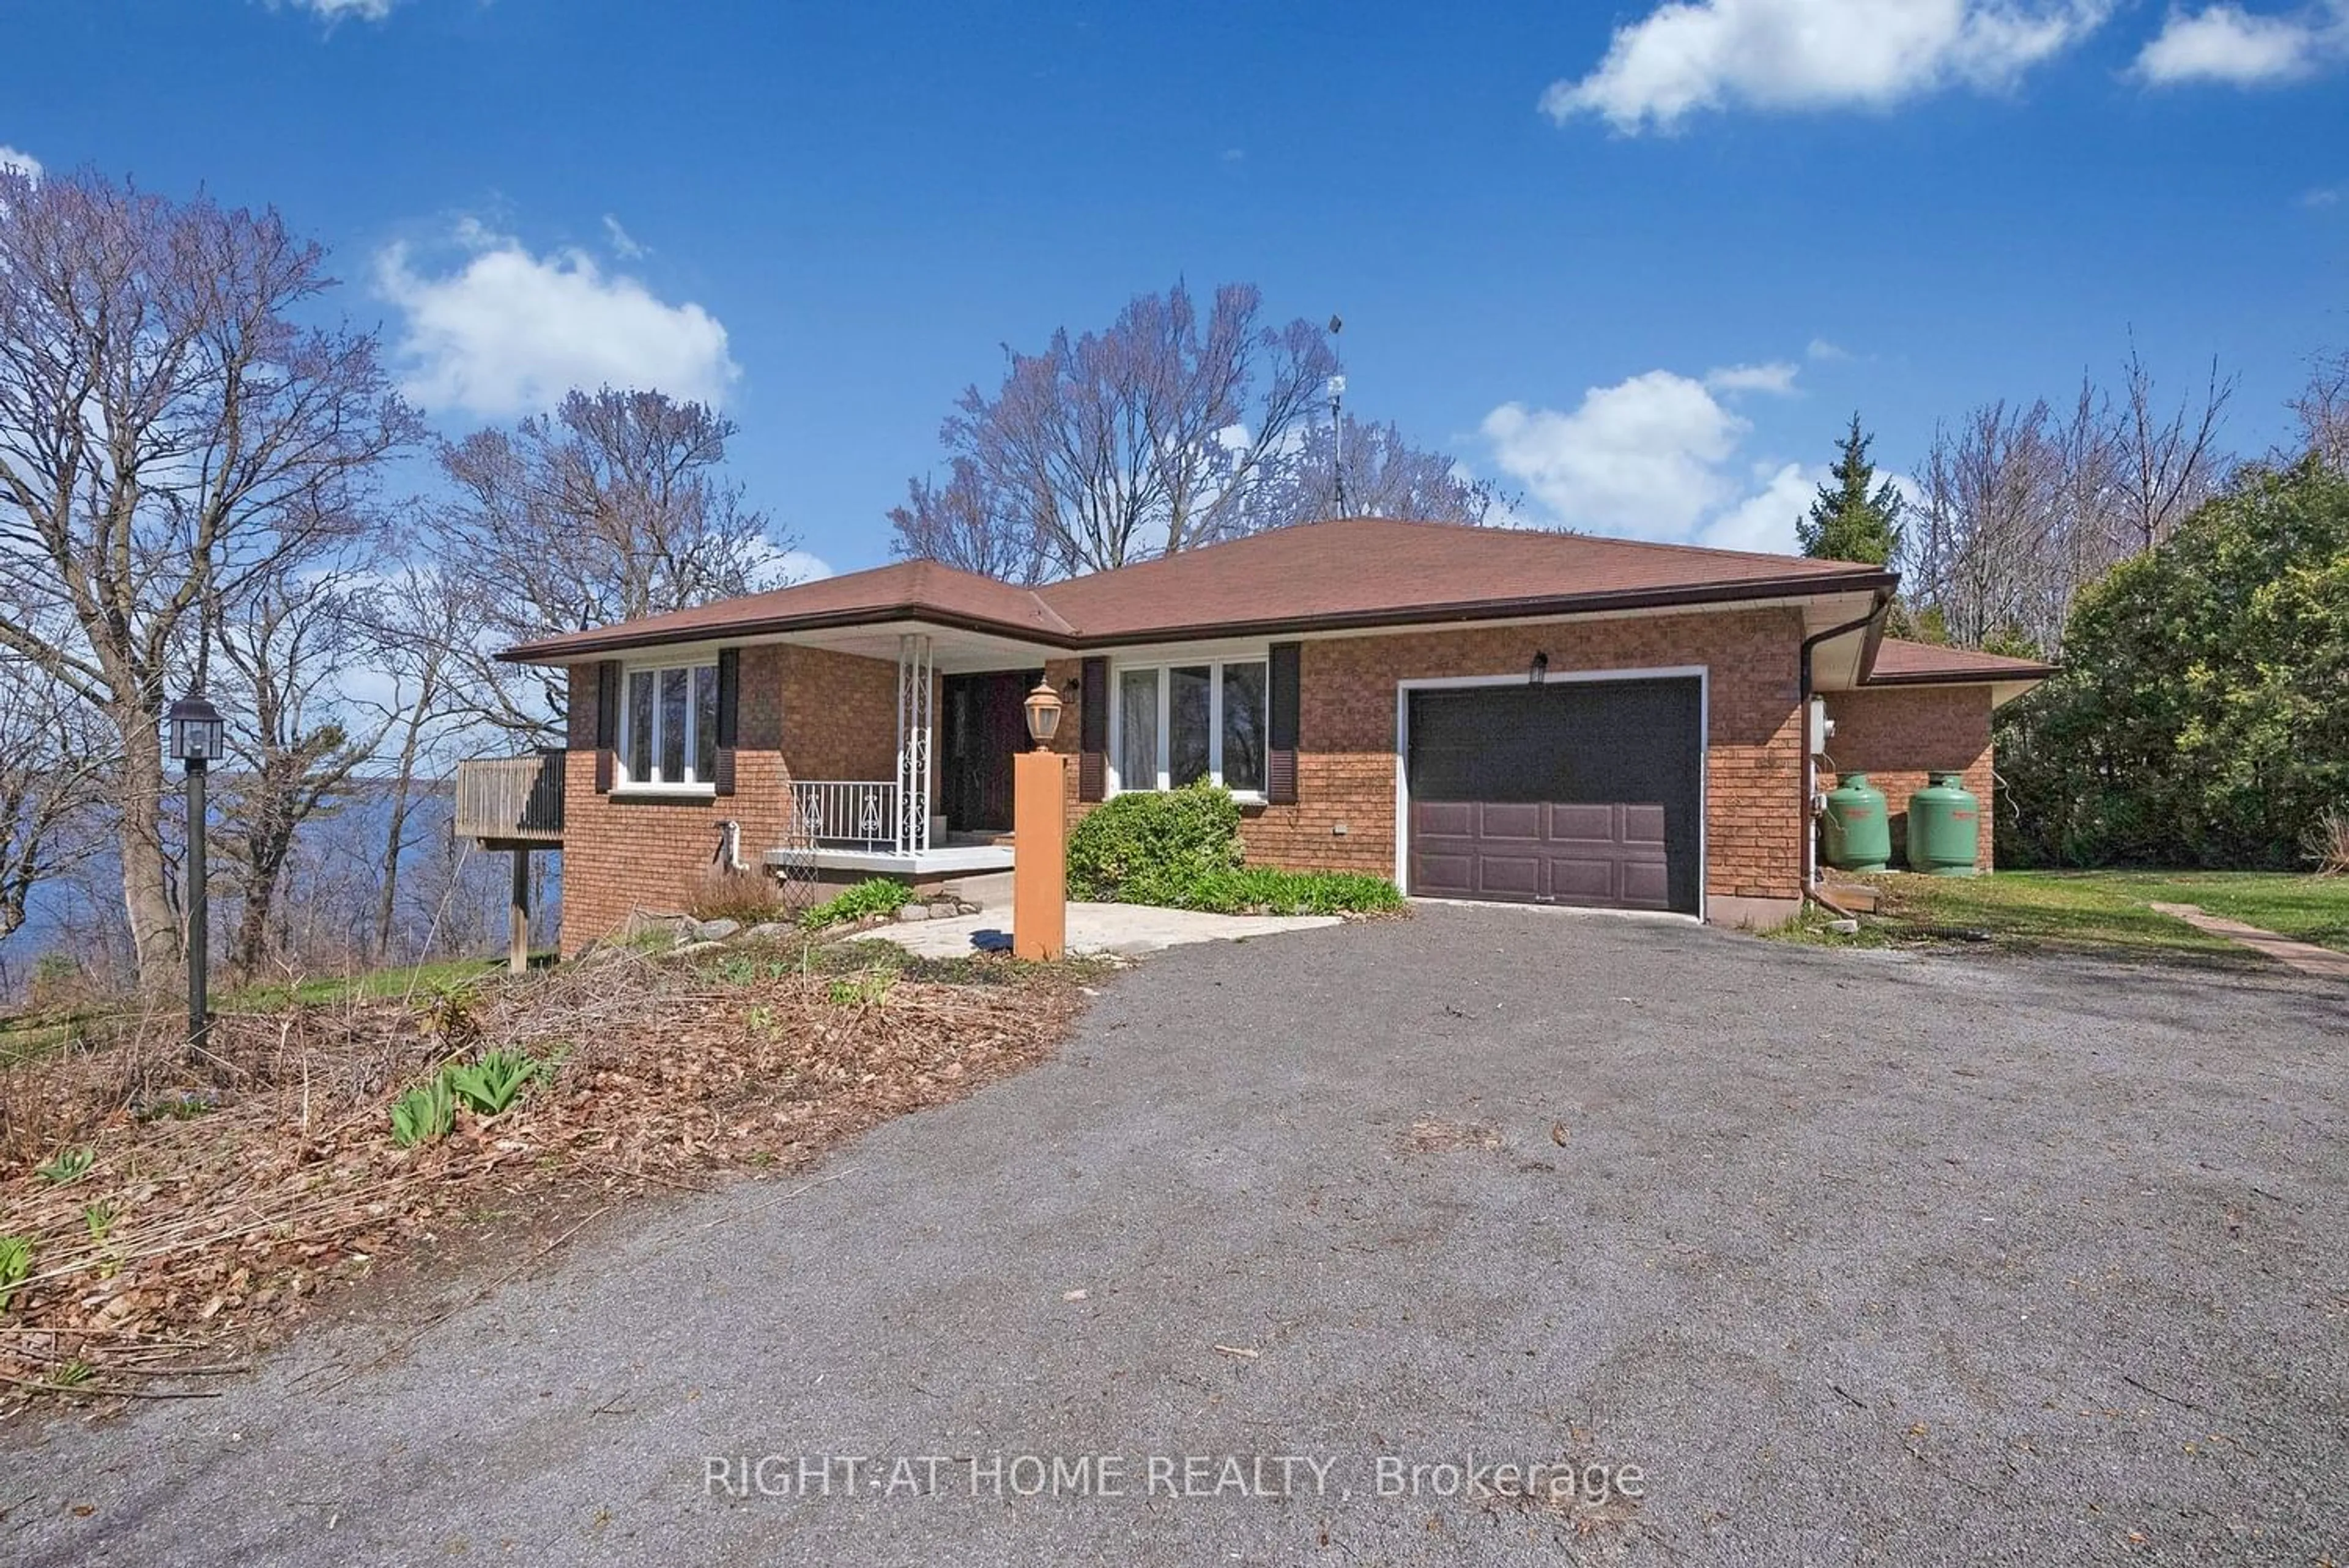 Home with brick exterior material for 7264 County 18 Rd, Alnwick/Haldimand Ontario K0K 2X0